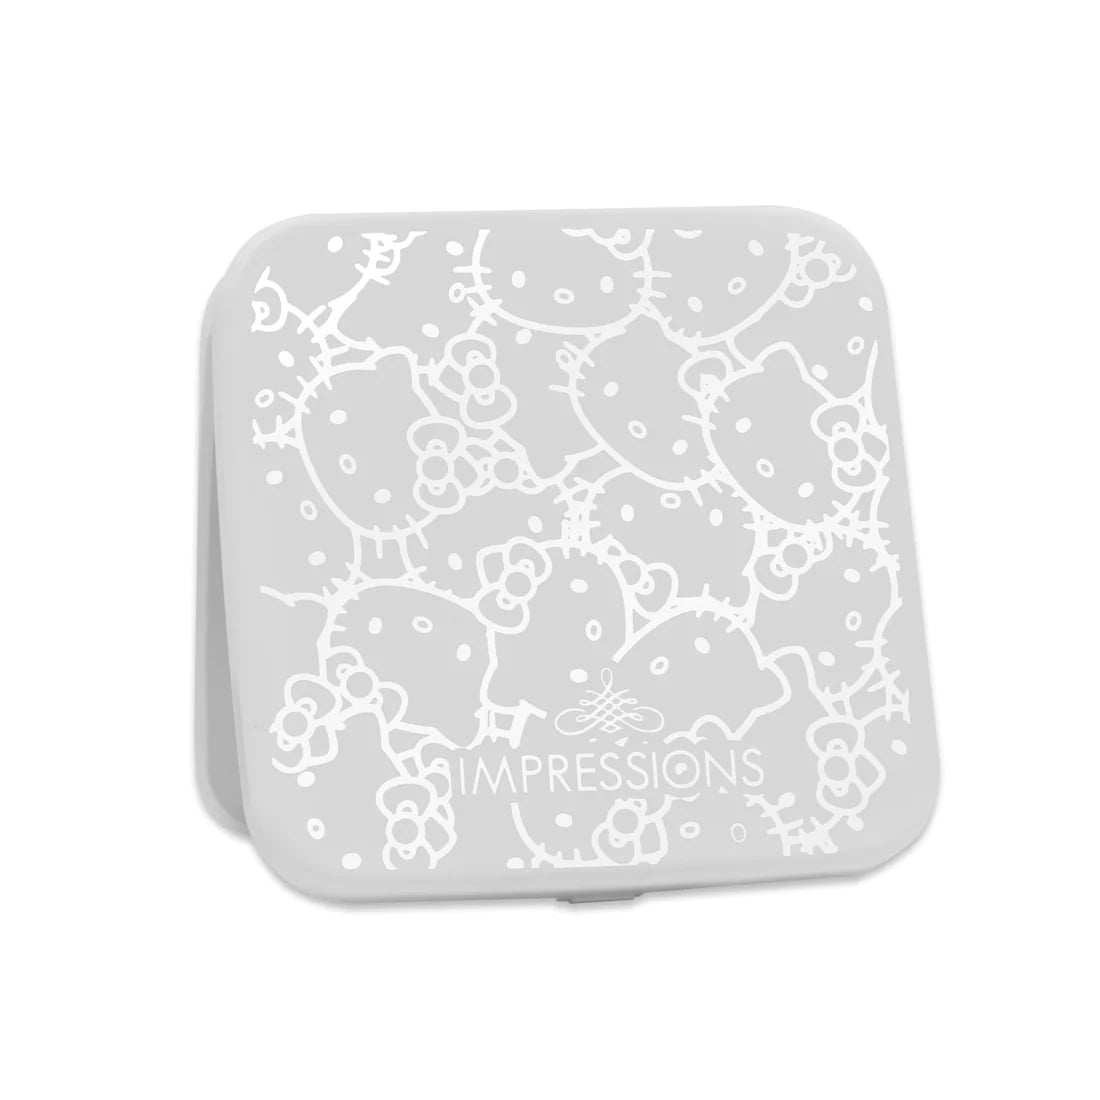 Impressions Vanity - Hello Kitty Supercute Compact Mirror with Magnification White